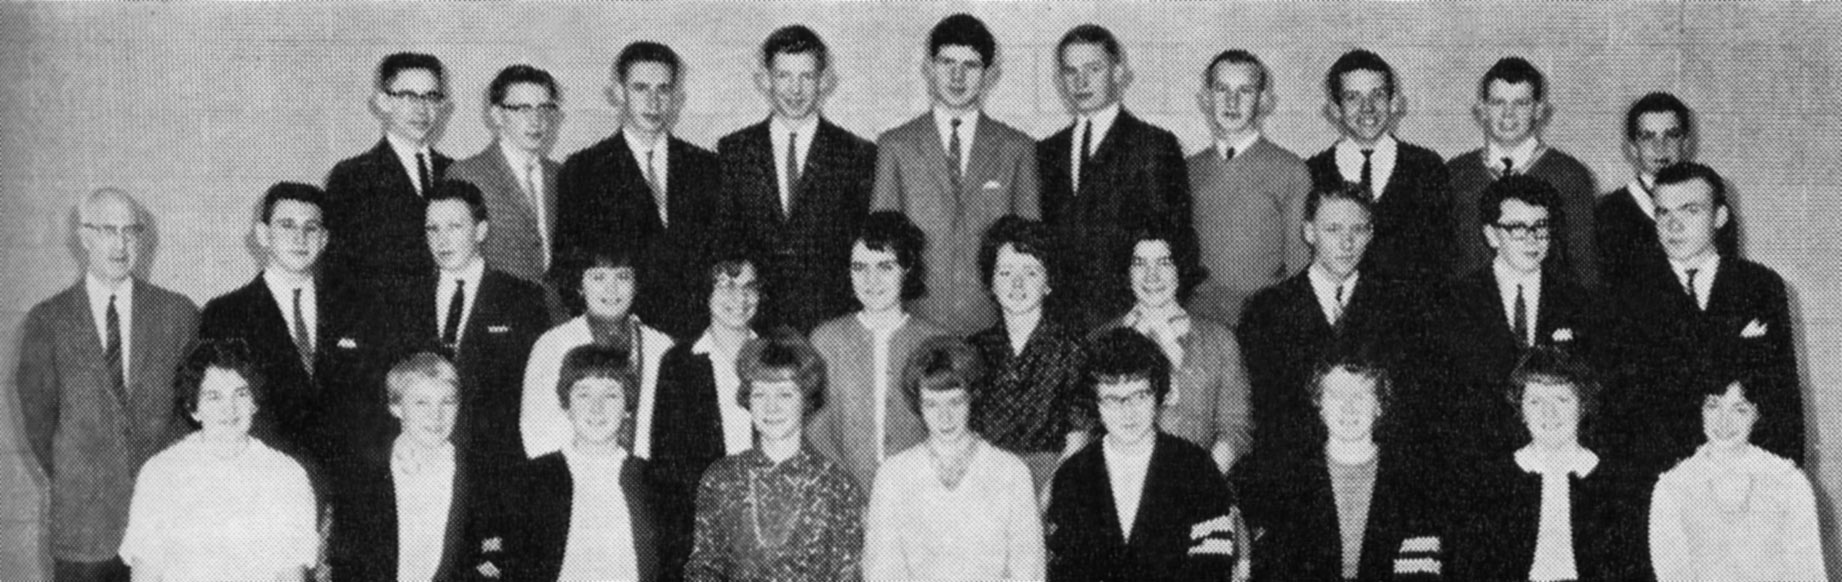 (Click to magnify) FRONT ROW: L. Ashton, N. Bernhardt, J. Hickling, A. Sweetman, M. Vanderwal, D. Bagshaw, B.A. Hall, M. Geissberger, A. Shier; ***SECOND ROW: Mr. Colbeck, Preston Archibald, R. Cleverdon, G. Harrison, C. Moore, L. Mitchell, G. Dowswell, K